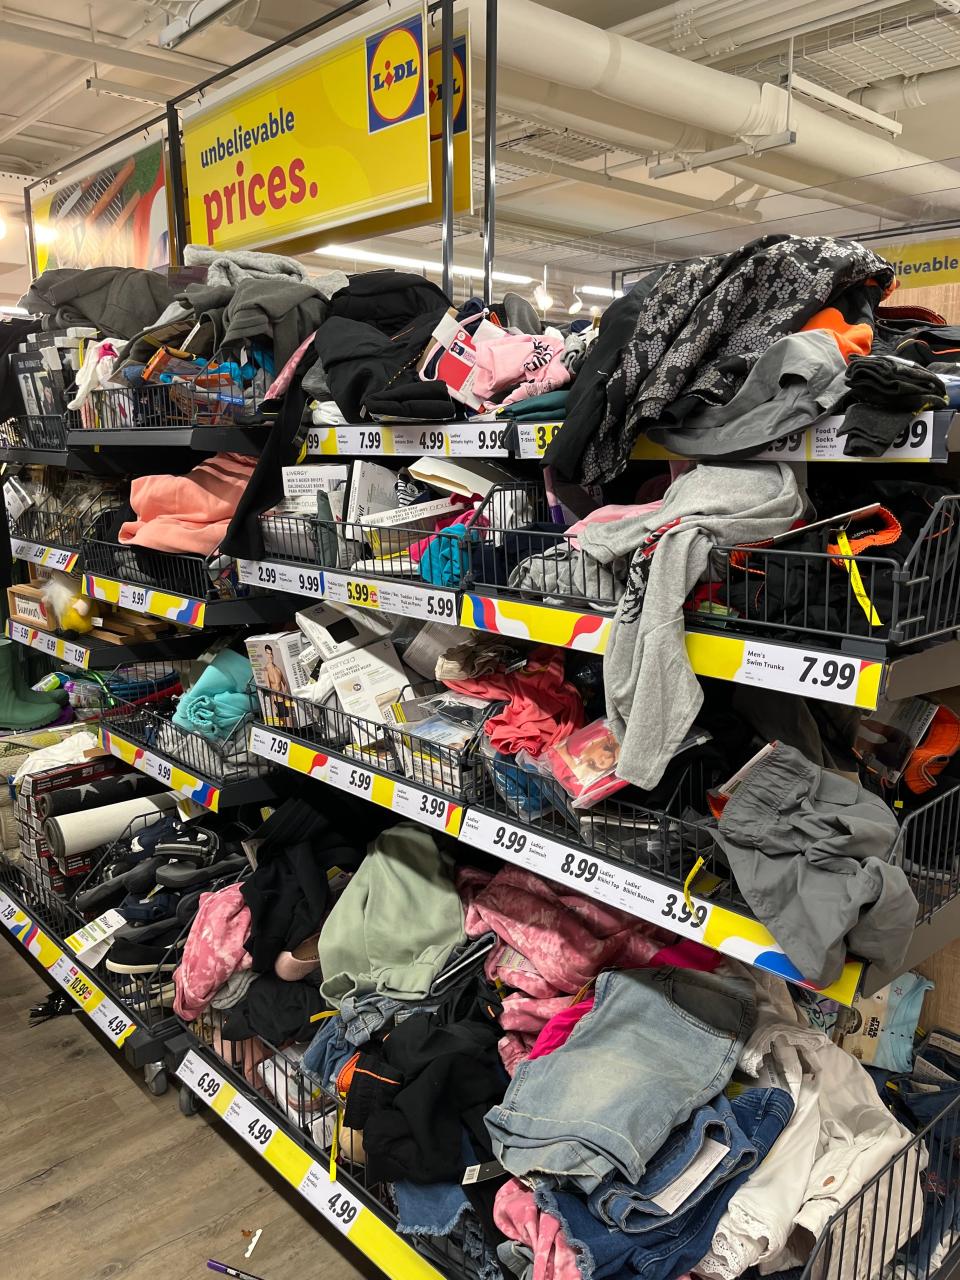 You could also buy some piles of clothes at Lidl Harlem.